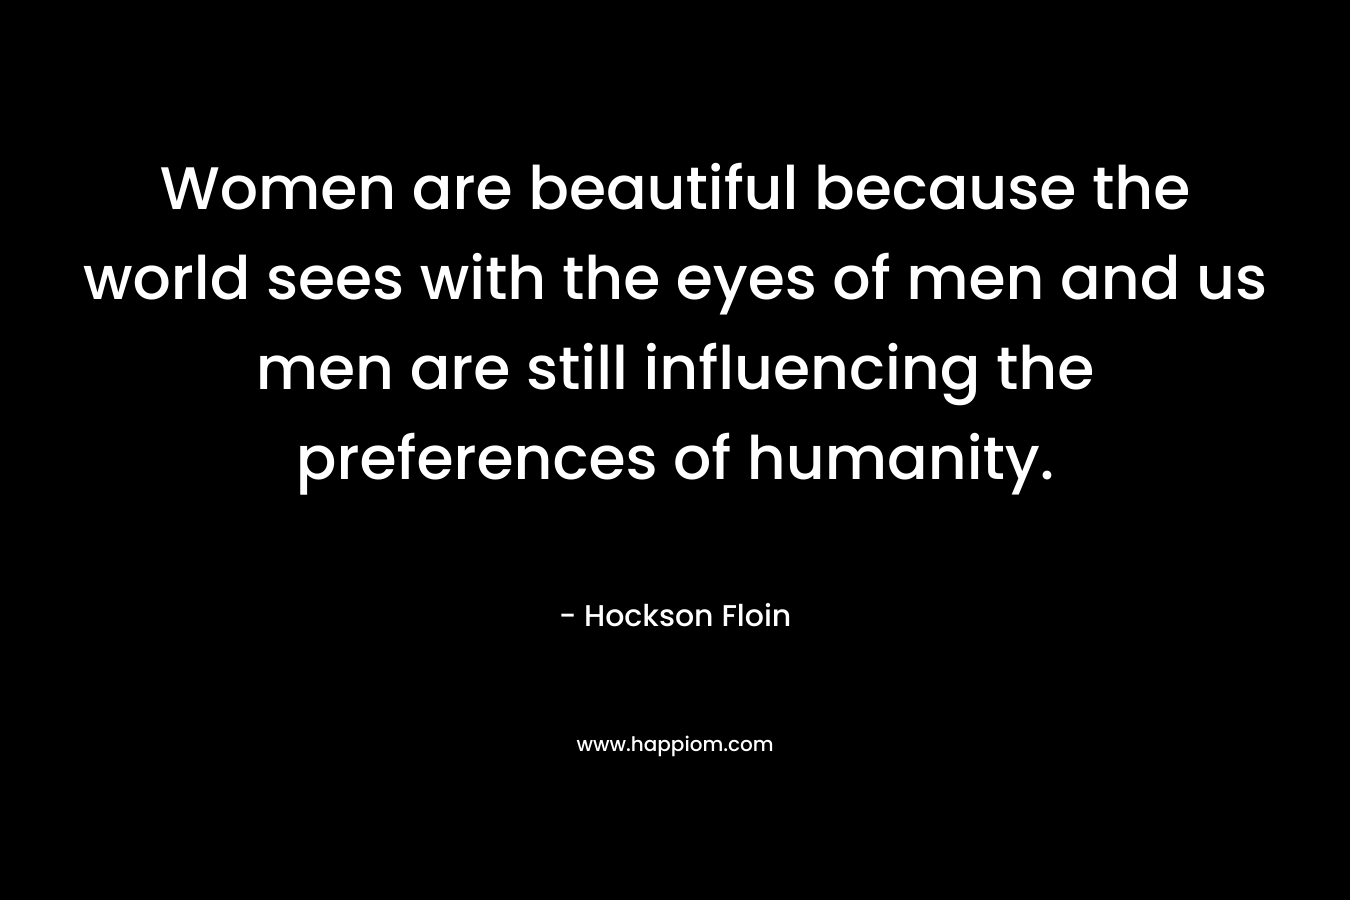 Women are beautiful because the world sees with the eyes of men and us men are still influencing the preferences of humanity. – Hockson Floin